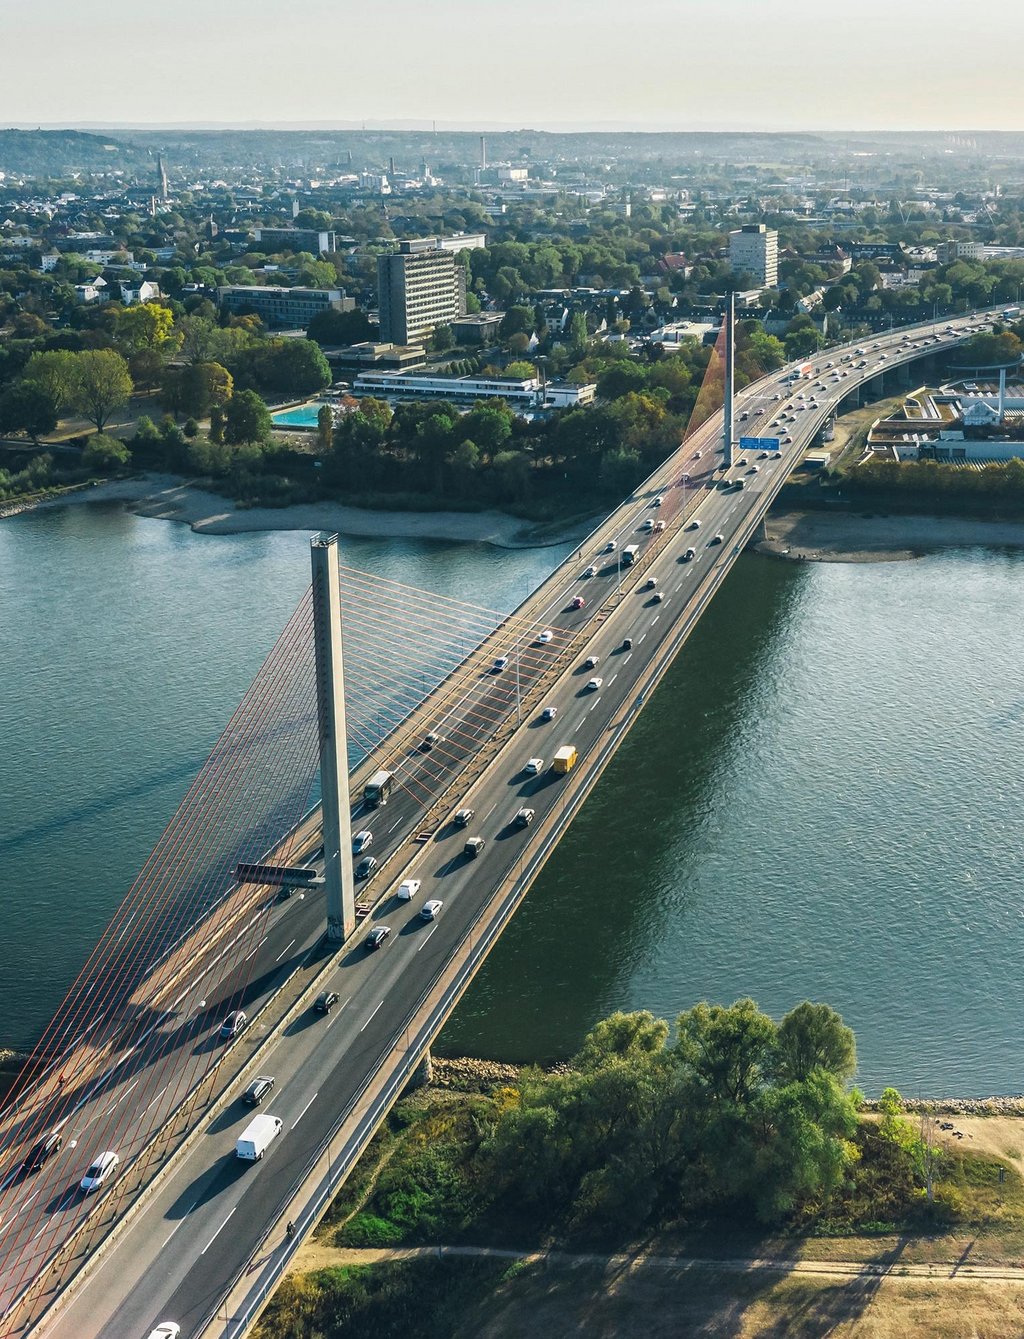 Aerial view of the Friedrich-Ebert-Brücke, which connects the Bonn district of Beuel with the district of Bonn.